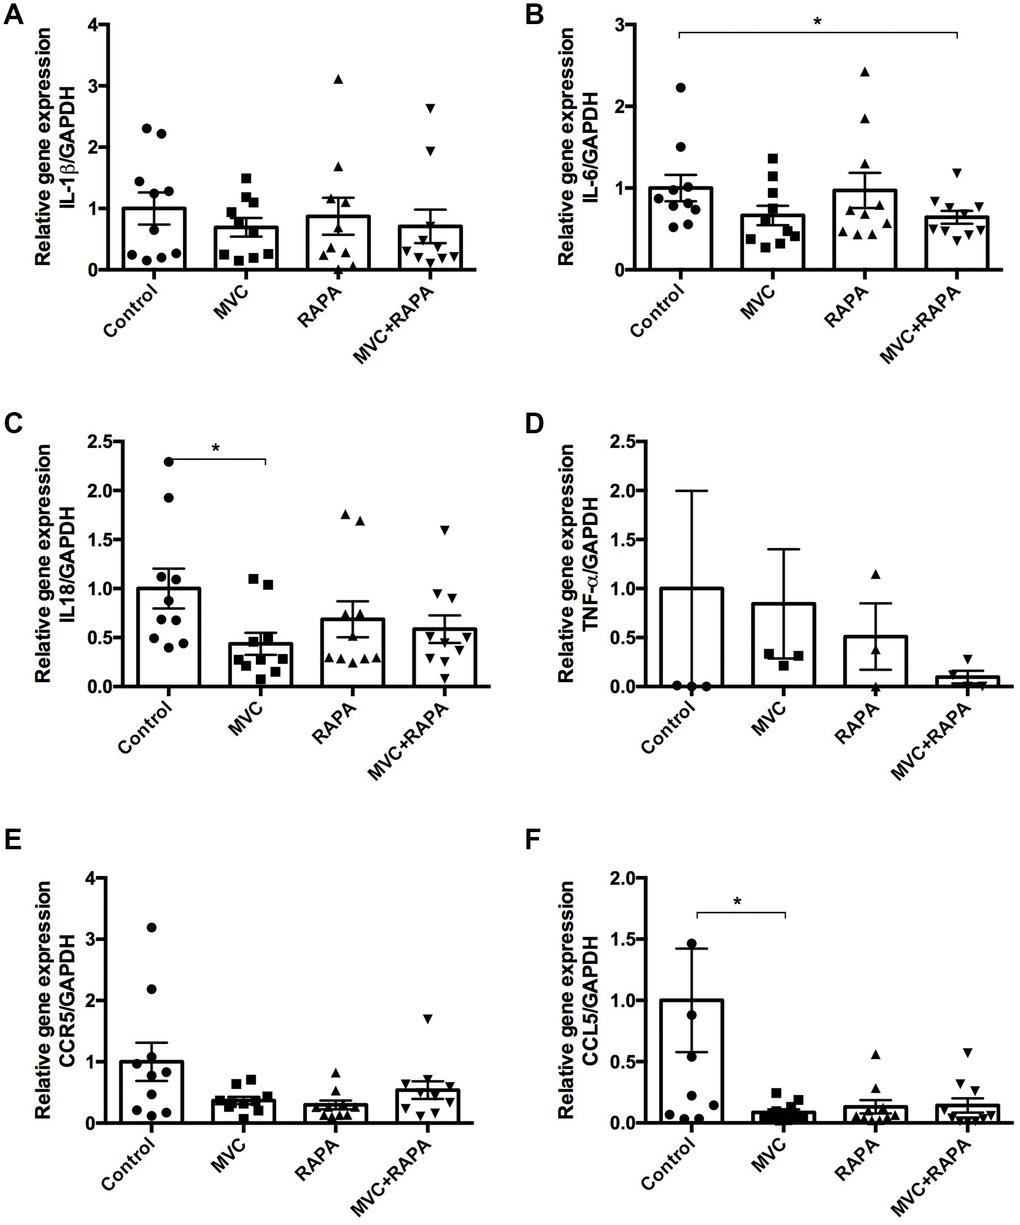 Muscle expression of IL-1β, IL6, IL-18, TNF-α, CCR5 and CCL5 at the RNA level. (A) No differences were observed after analyzing IL-1β. (B) IL-6 expression was significantly lower in the MVC+RAPA group. (C) Although IL-18 expression was lower in all the therapeutic groups, it was only statistically significant in the MVC group. (D) Although TNF-α and (E) CCR5 expression were lower in all the therapeutic groups, none of them was statistically significant. (F) CCL5 expression was significantly lower in the MVC group and showed a clear tendency to statistical significance in the RAPA and MVC-RAPA group. Each bar represents the mean ± SEM. *p 